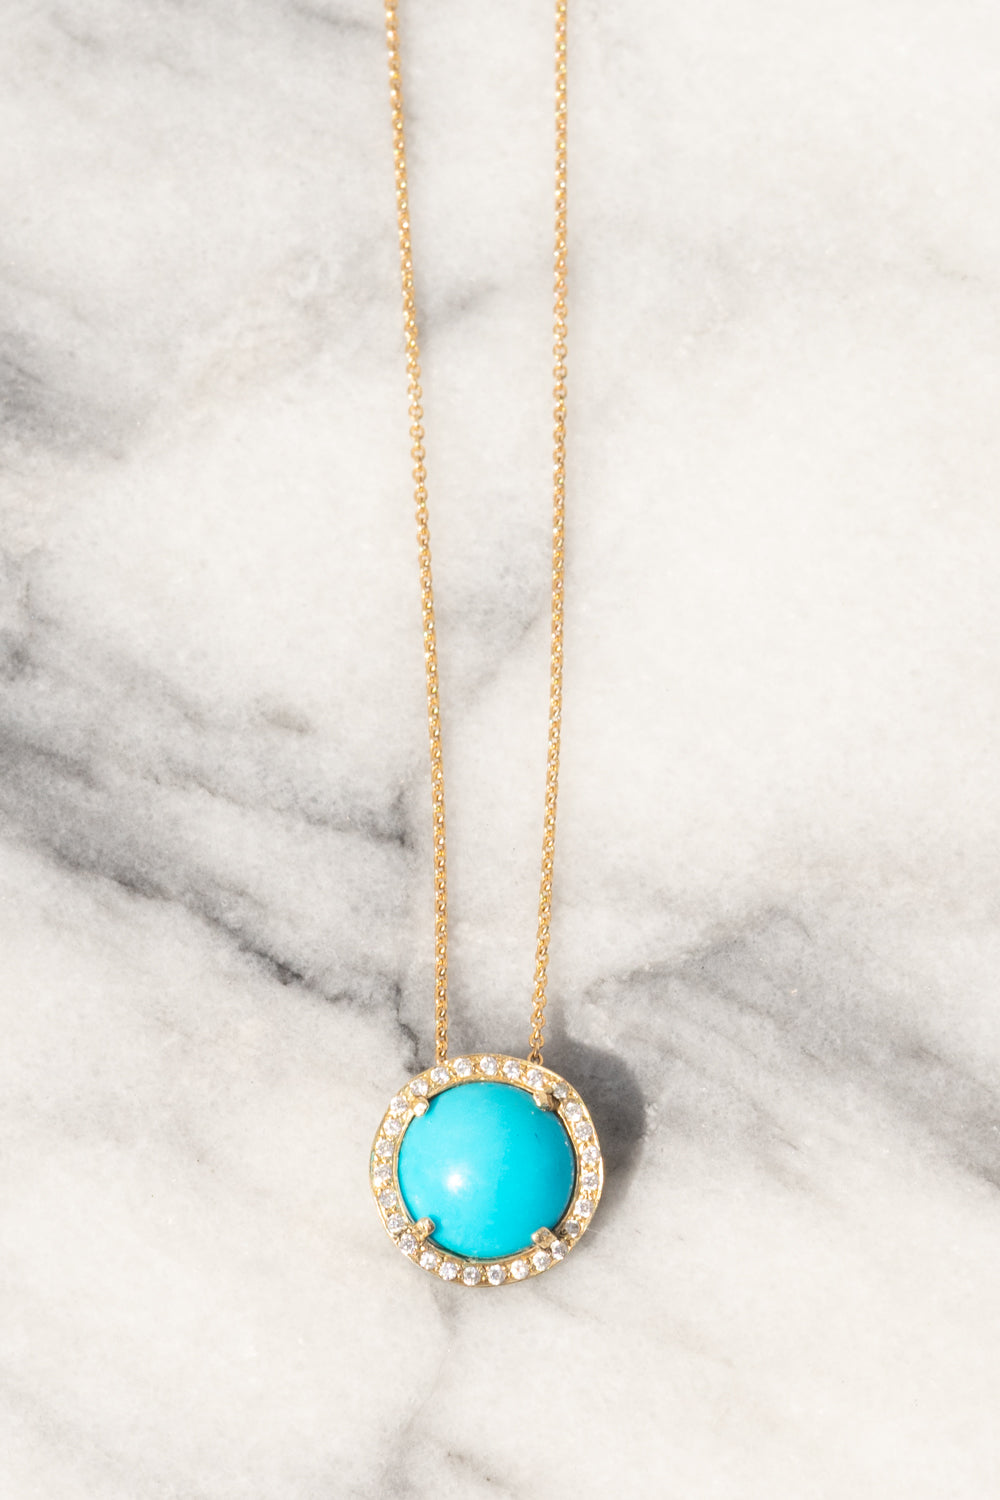 Janna Conner Sleeping Beauty Turquoise Necklace with Diamond Pavé 14K Yellow Gold